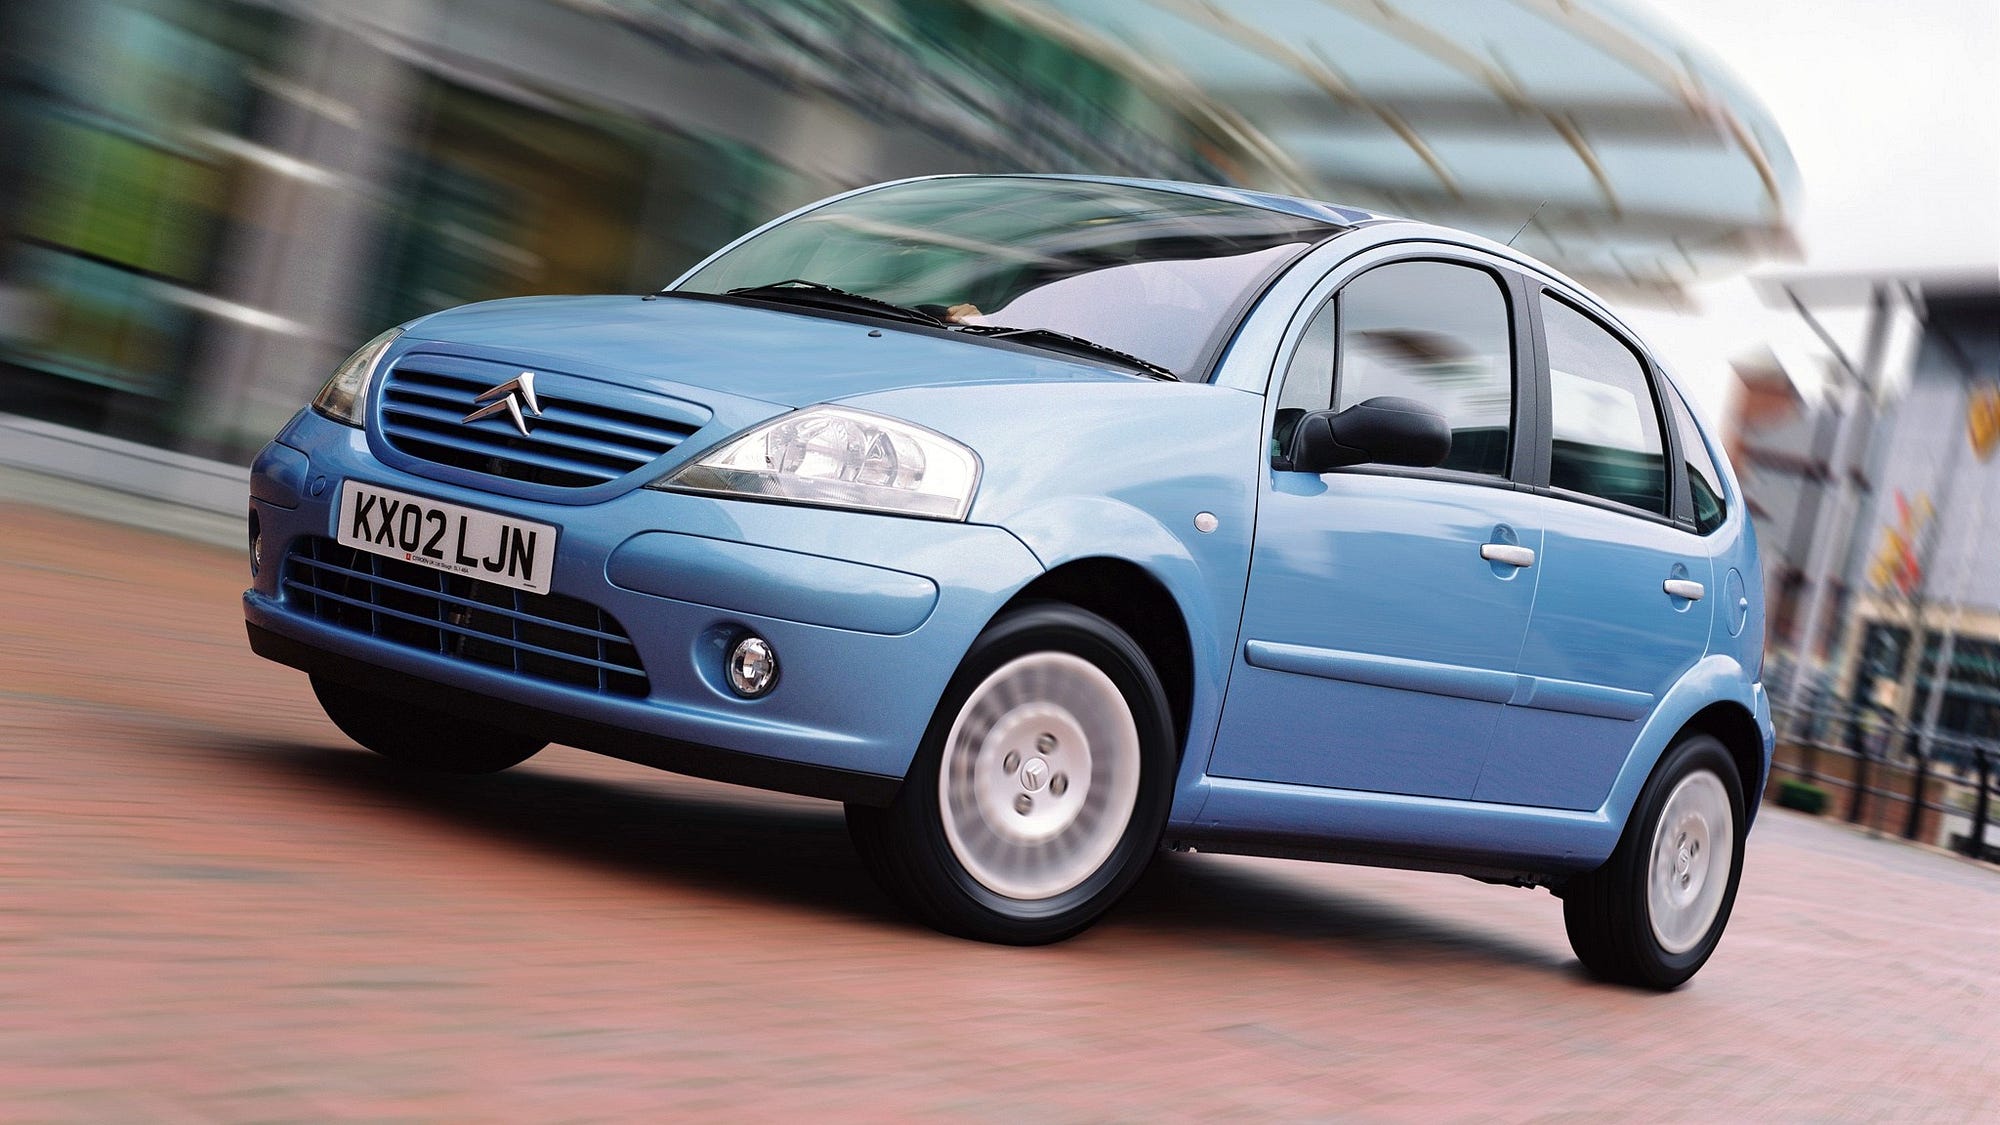 All CITROEN C3 Models by Year (2002-Present) - Specs, Pictures & History -  autoevolution